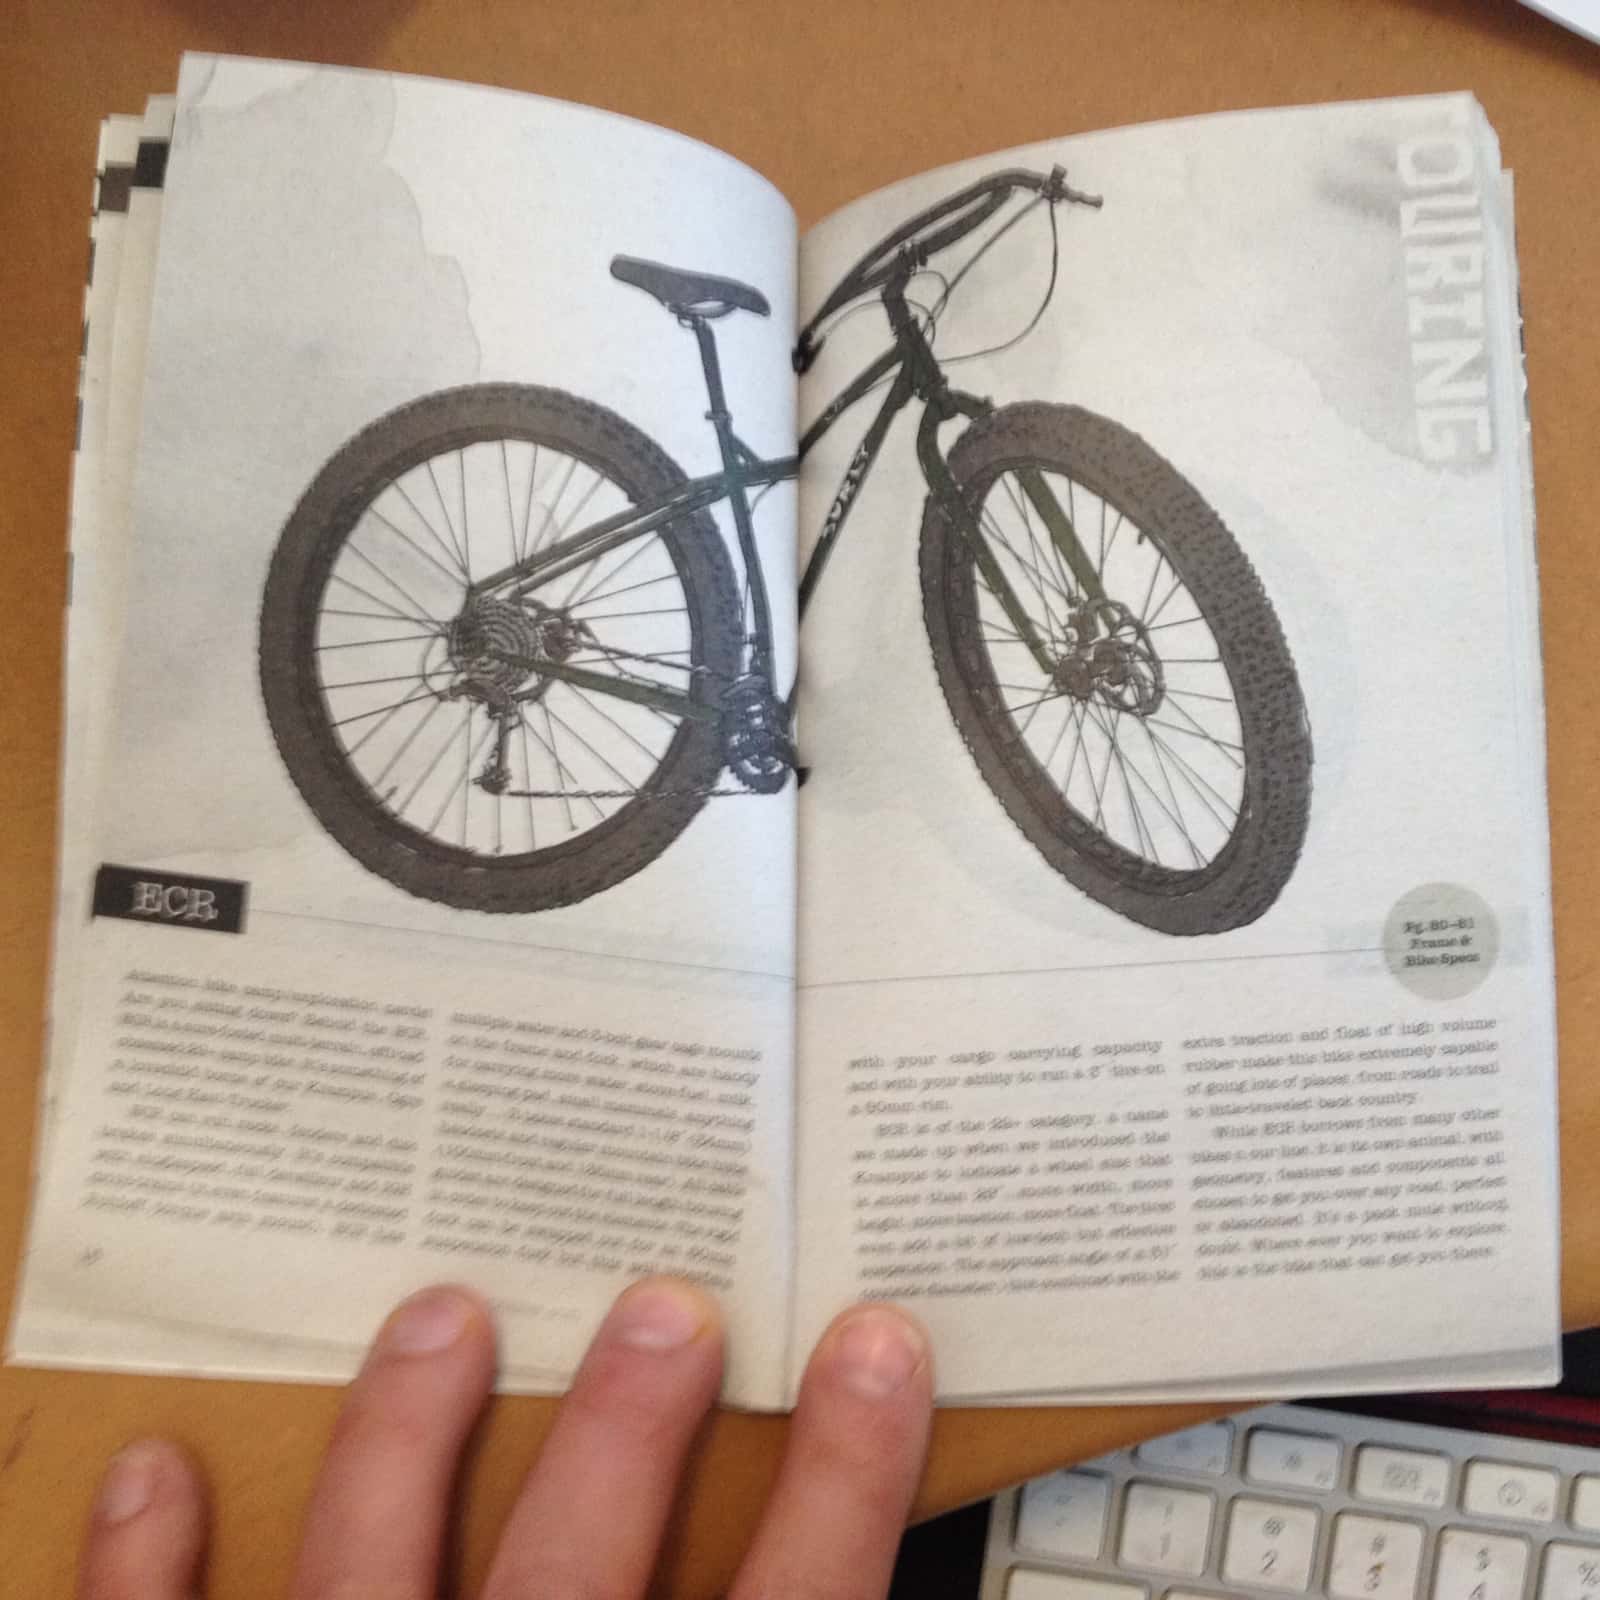 Downward view of an open catalog spread, showing a Surly ECR bike above and text below